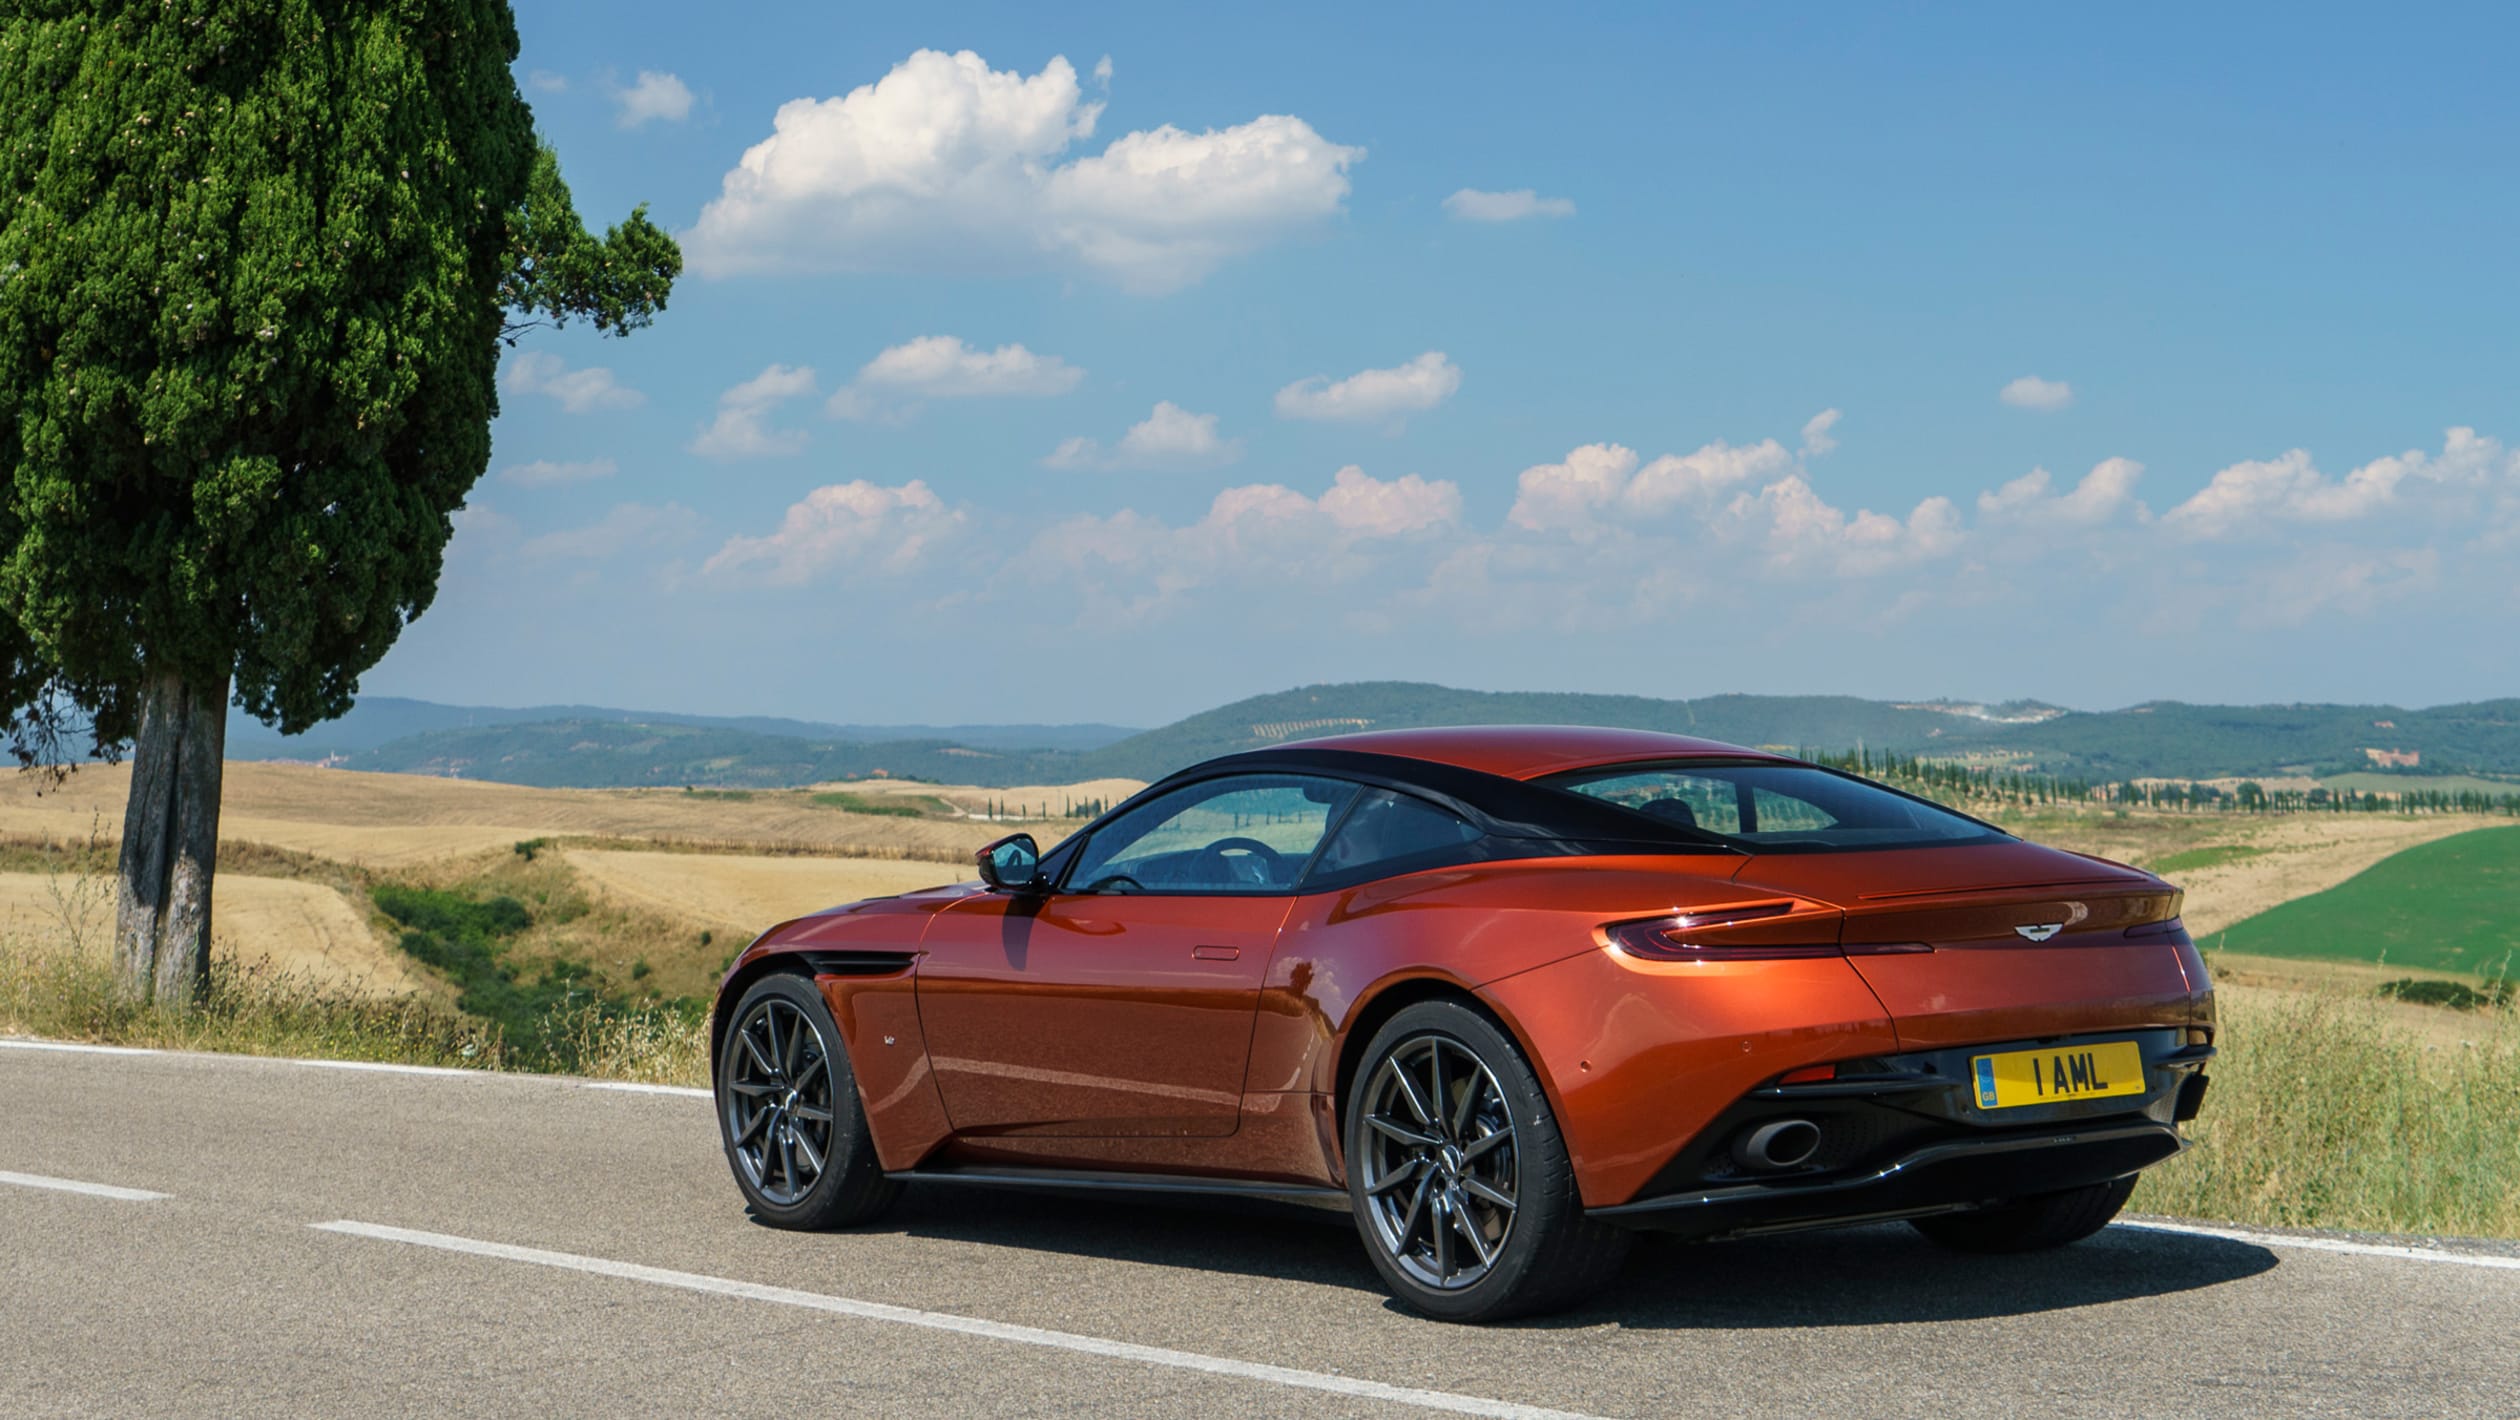 New Aston Martin DB11 2016 review - pictures | Auto Express